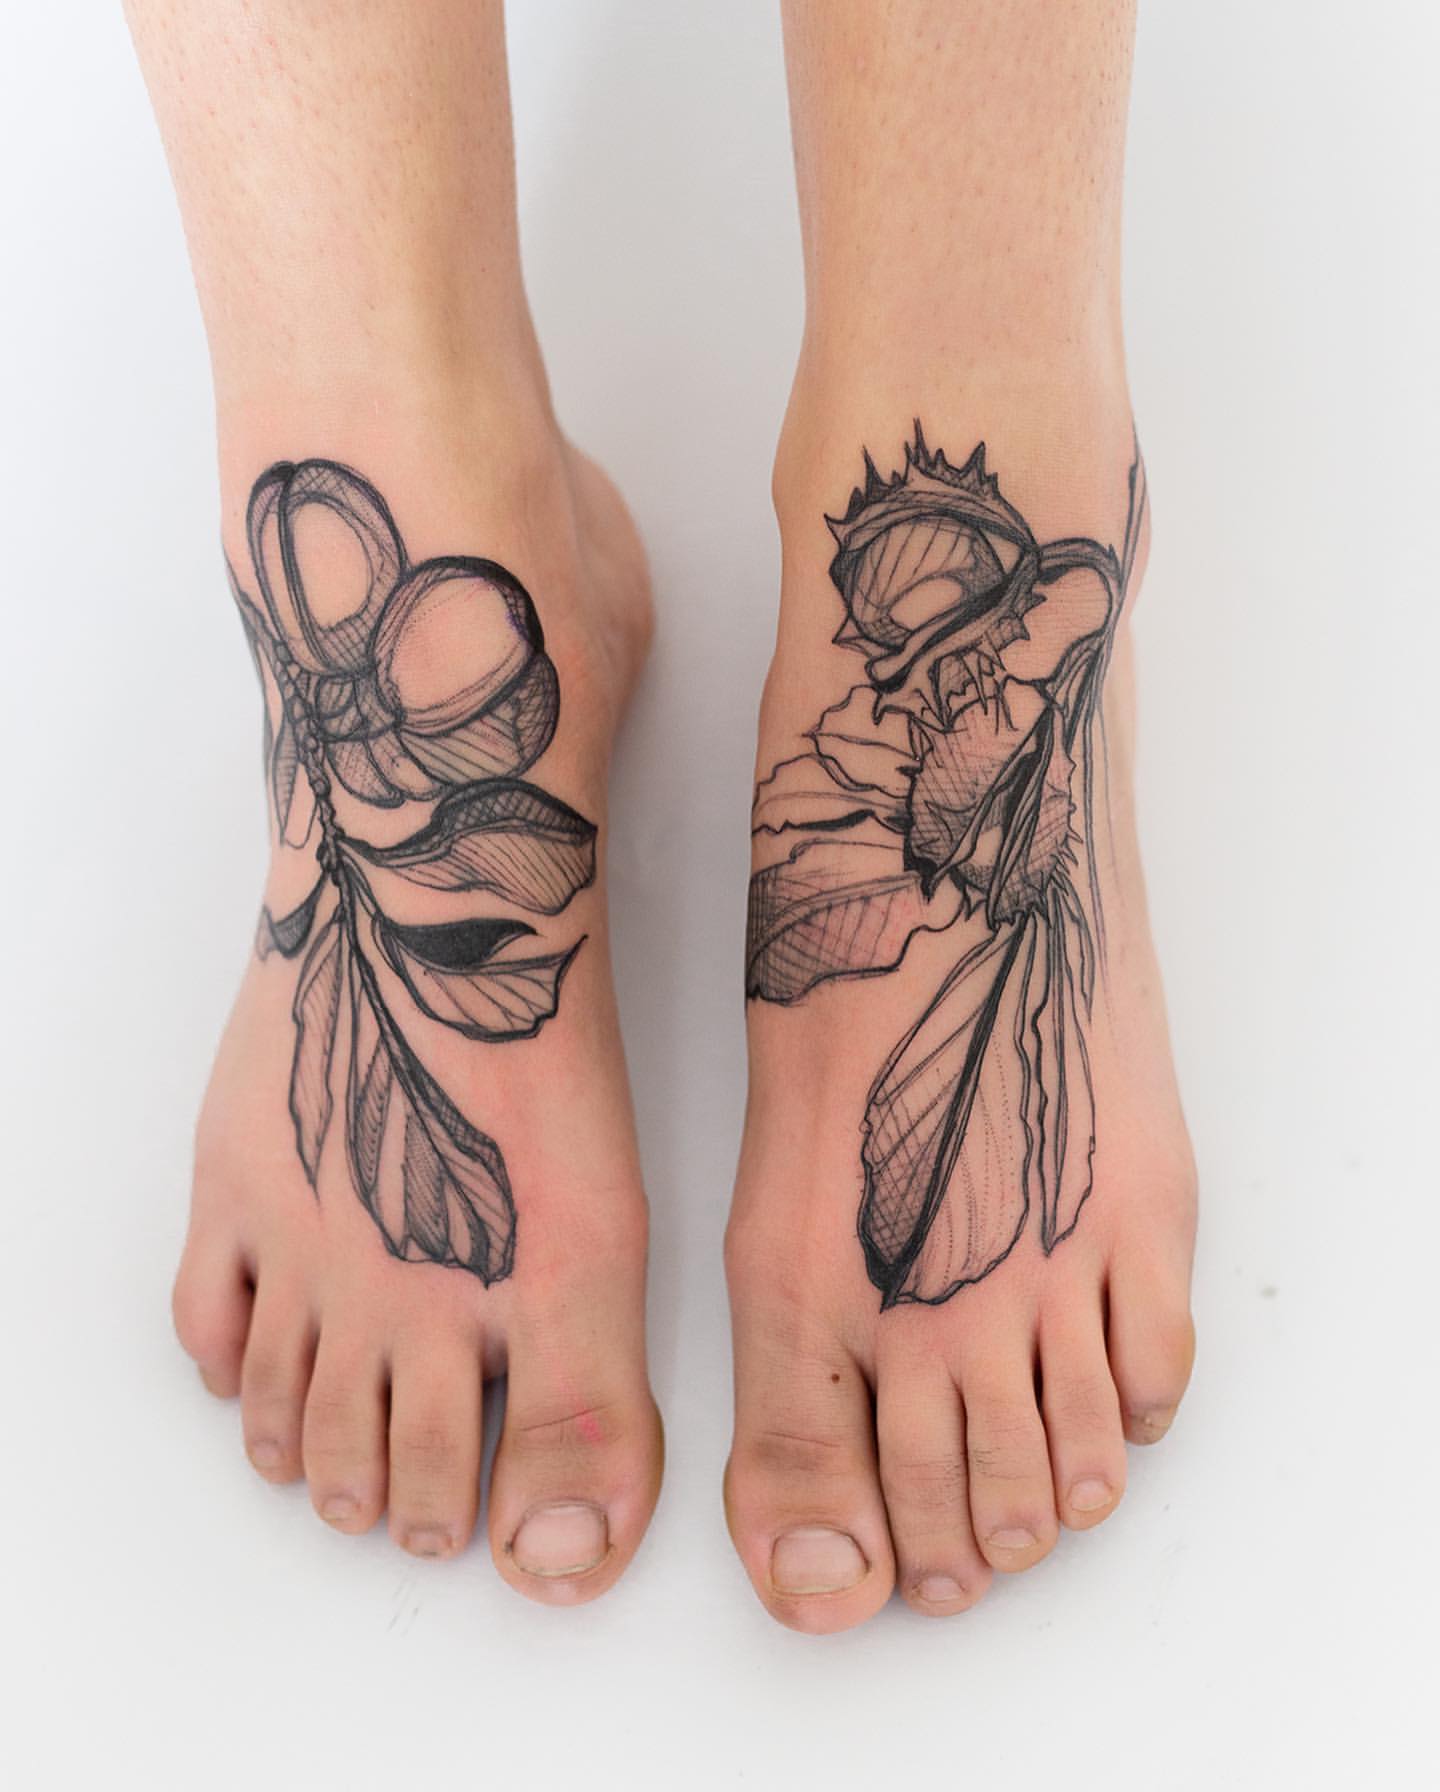 Foot Tattoos for Women 14